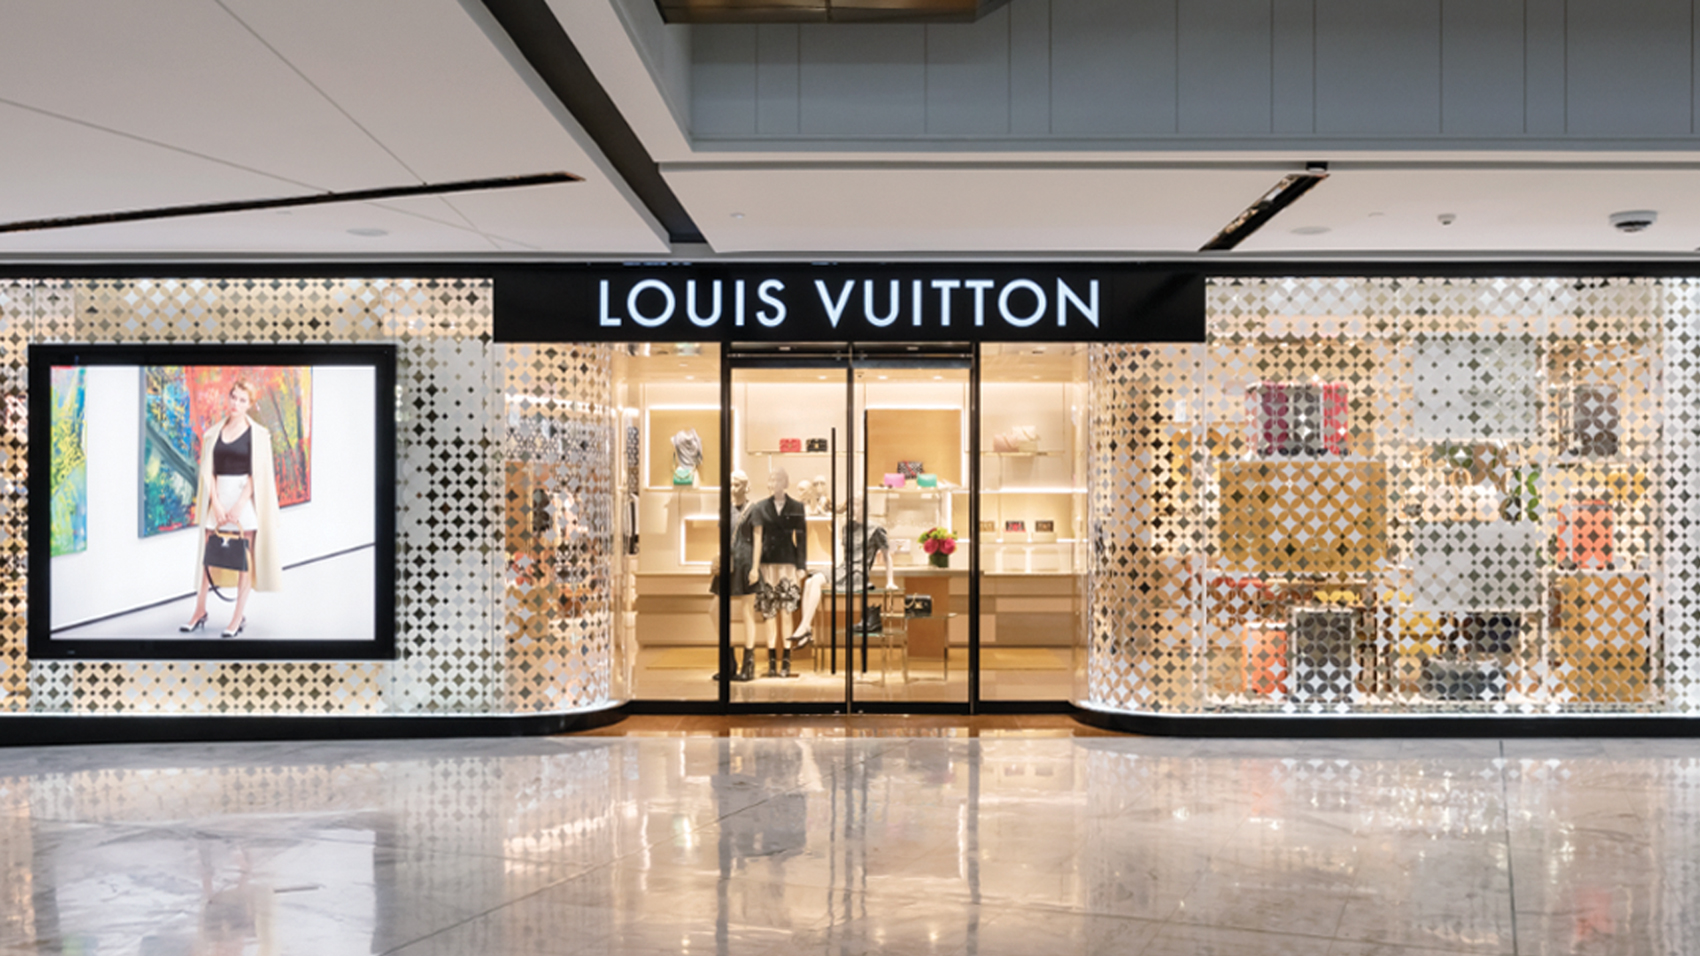 Louis Vuitton invites GLAM students to its flagship store at Place Vendôme